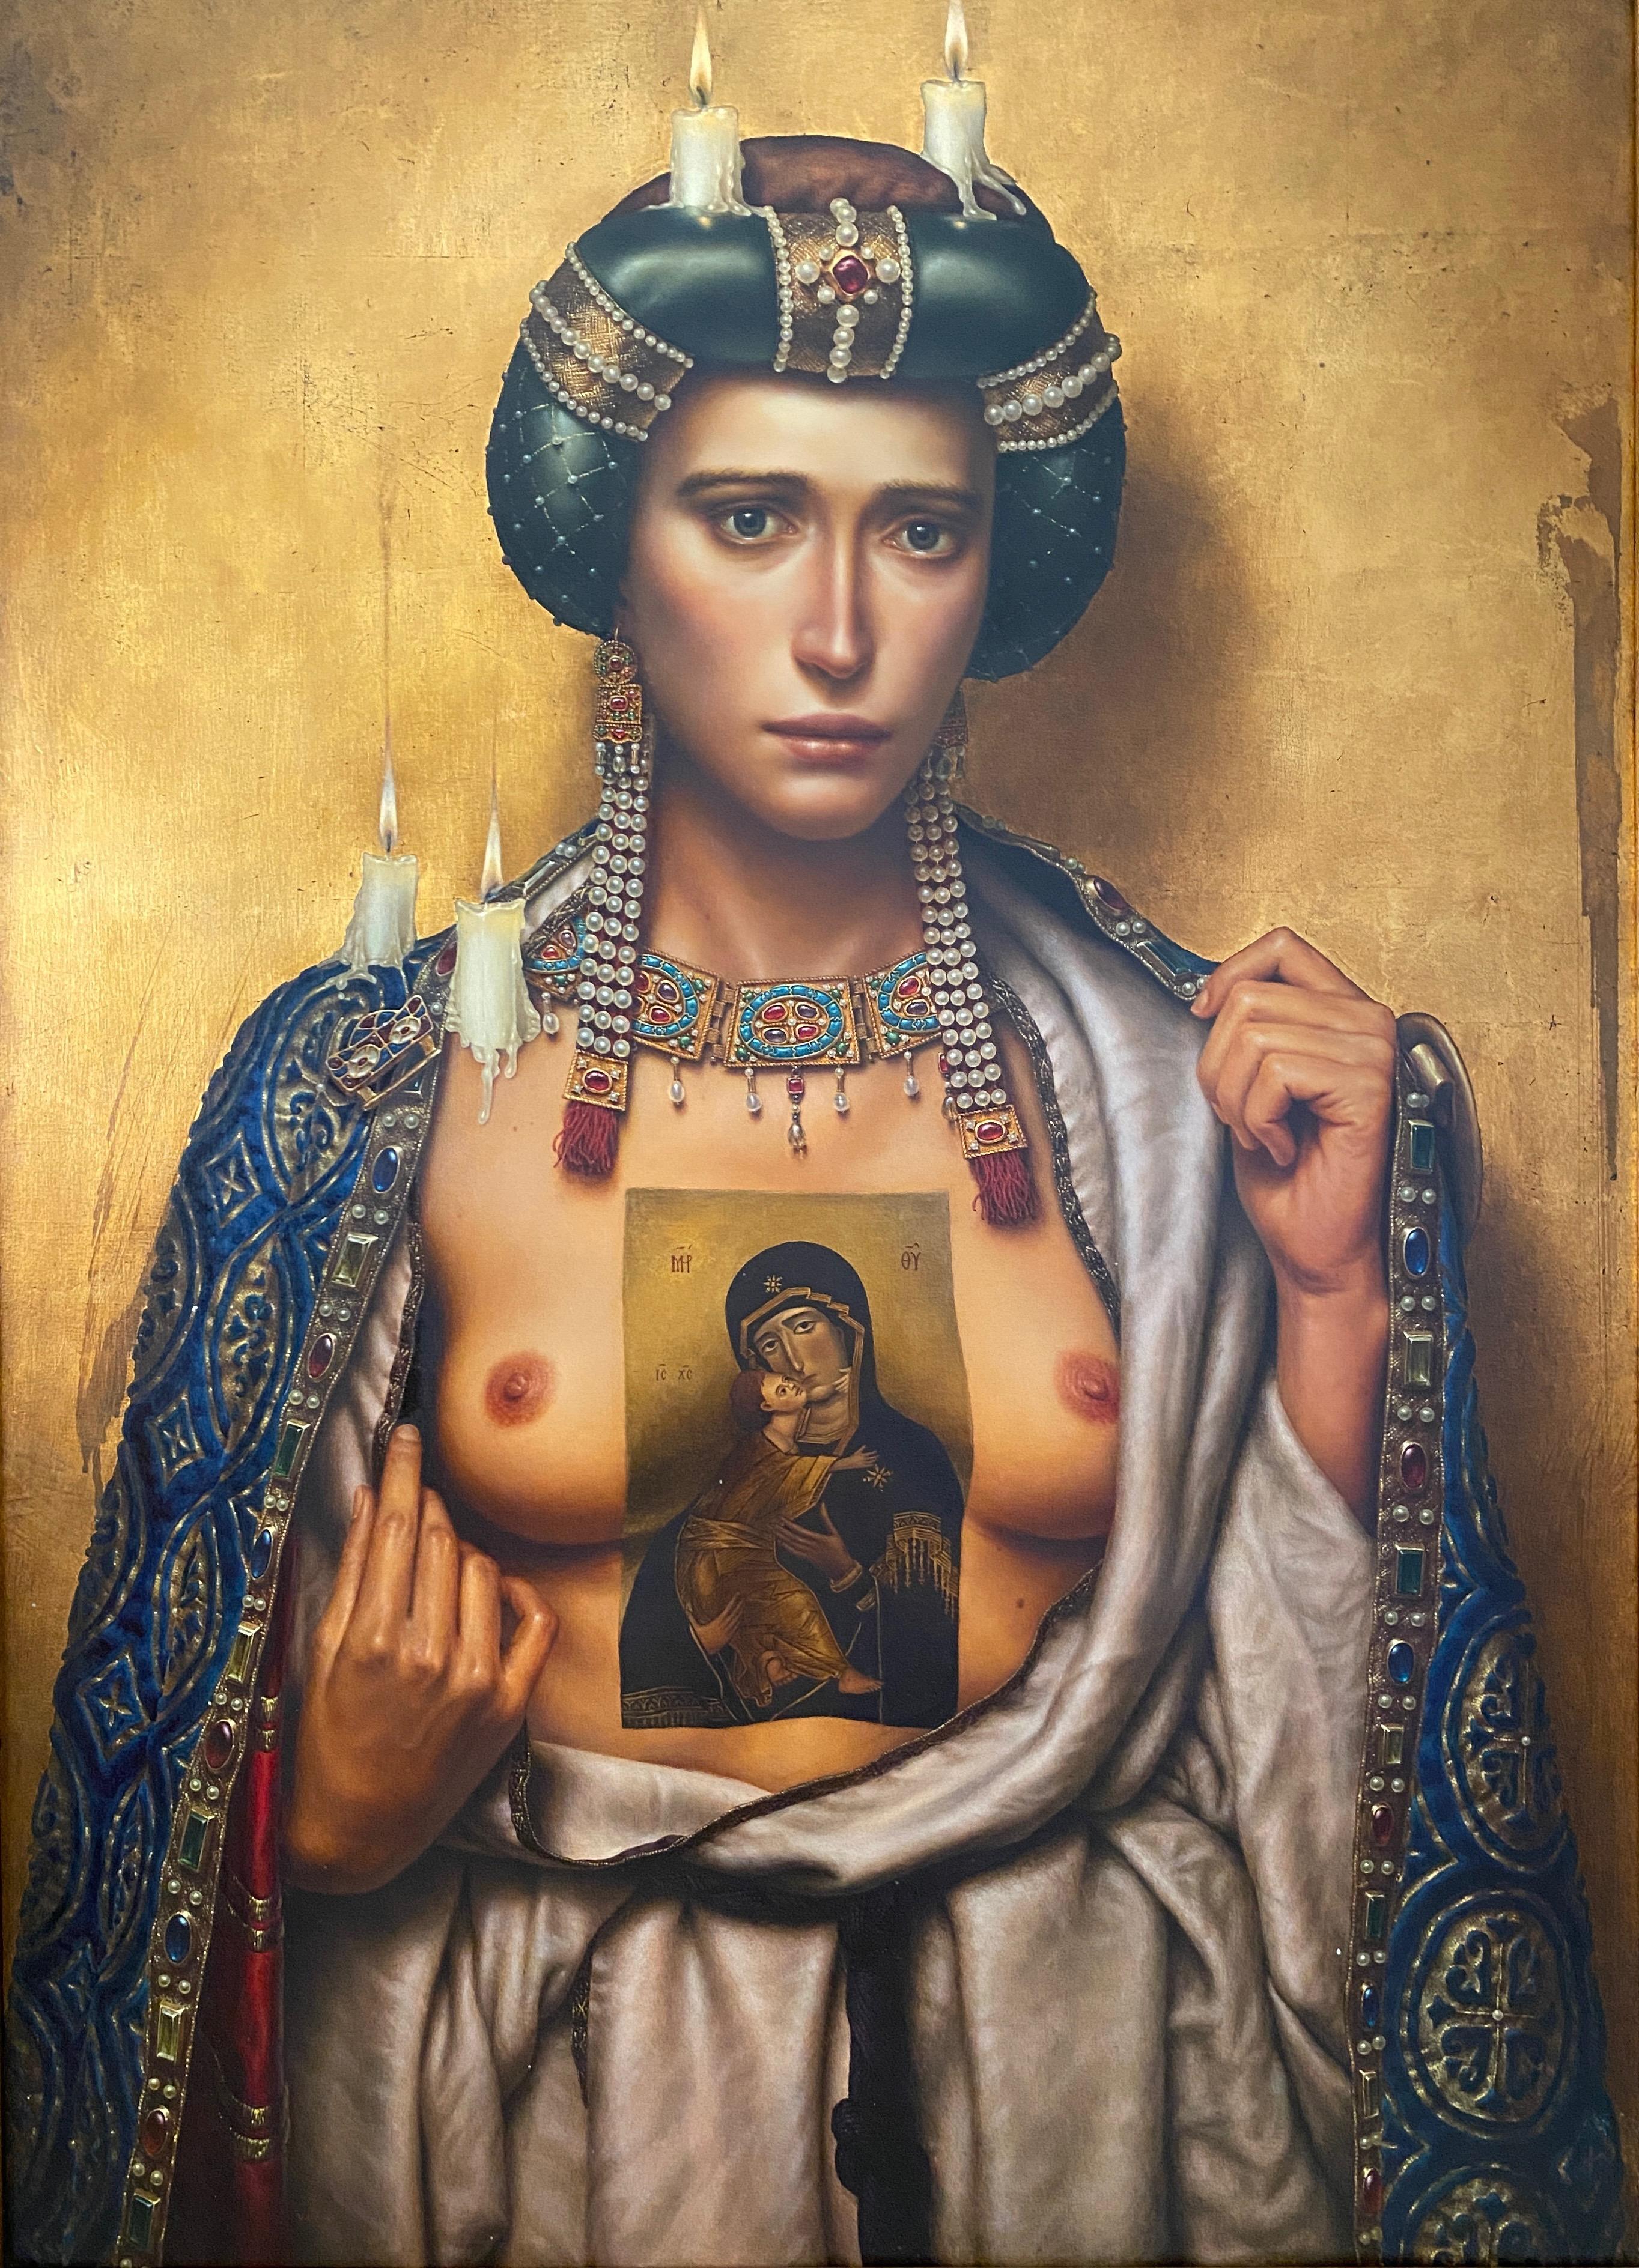 Glycofilusa. 
Oil on panel 100 x 70 cm / Framed 

The title of this work, is a Greek term that refers to an iconographic form of representation of the baby Jesus and the Virgin Mary typical of Byzantine art, especially in icons. The Virgin holds the